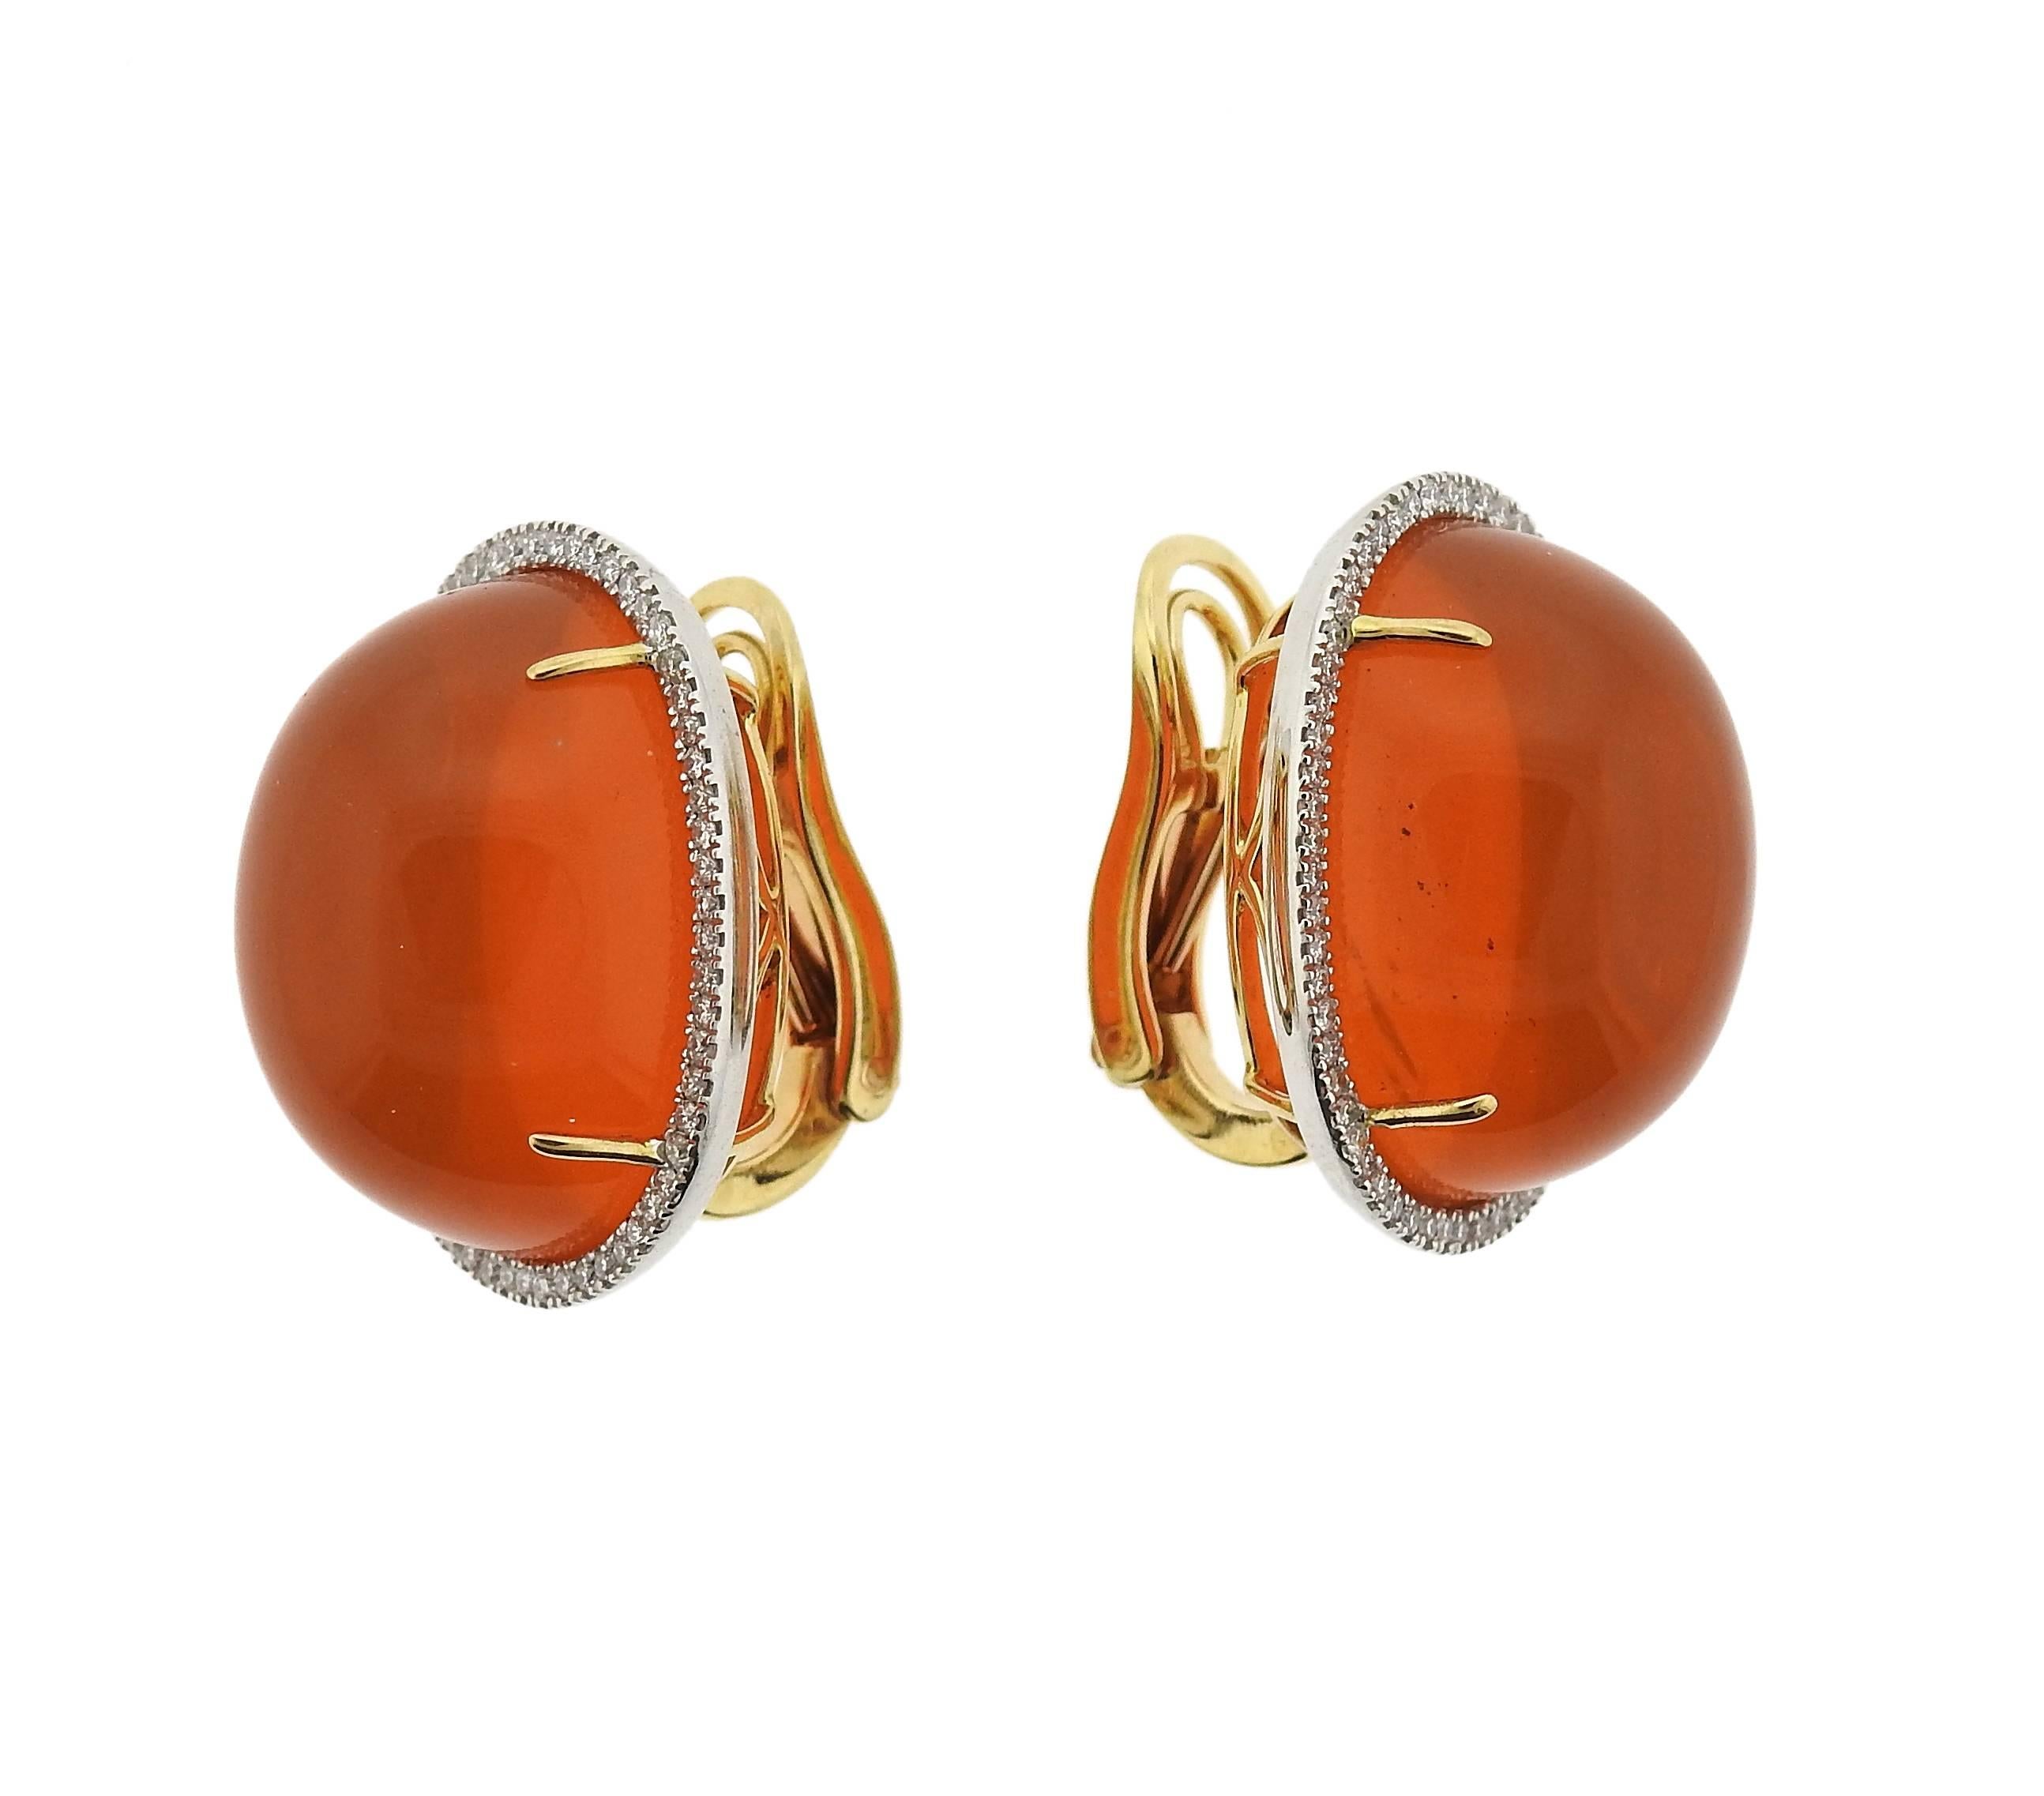 18k gold earrings, crafted with 20mm x 15mm Mexican fire opal cabochons, surrounded with approximately 0.30ctw in diamonds. Earrings measure 22mm x 18mm. Weight - 21.4 grams 